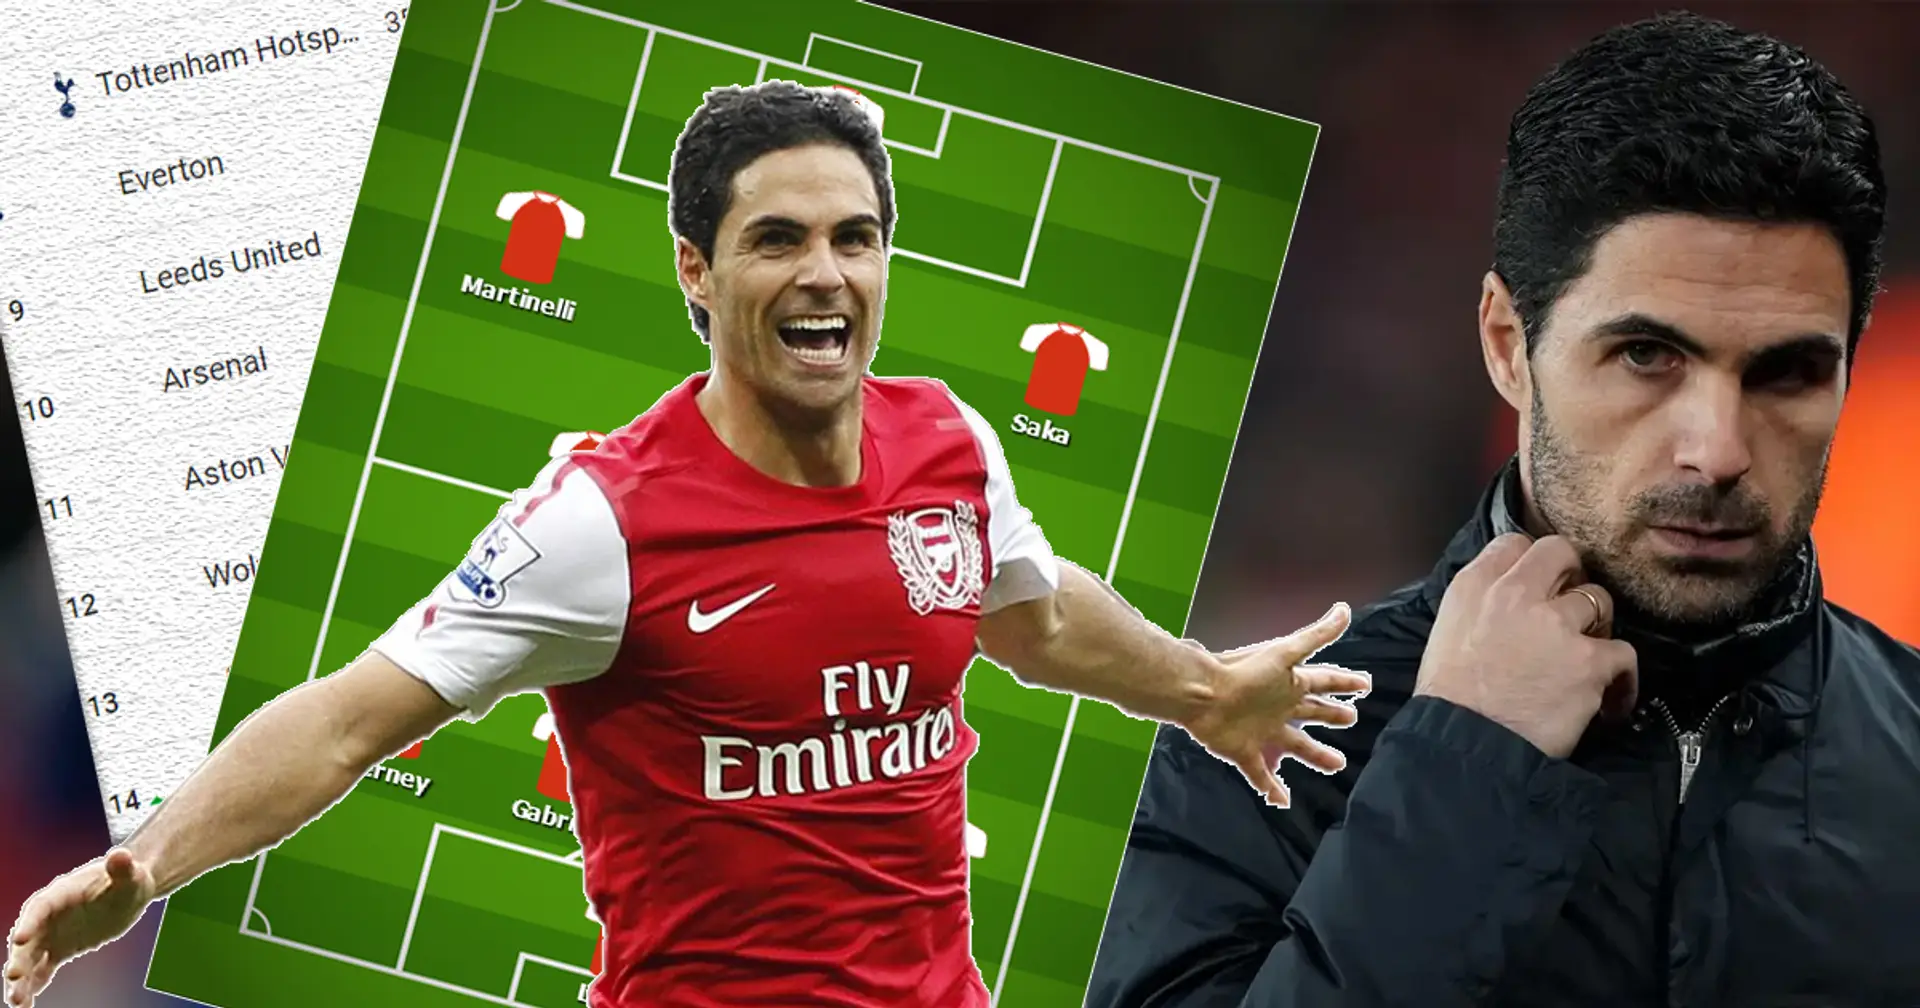 'Even Arteta himself can start, I don't care': Arsenal fans pick ultimate XI for West Brom game